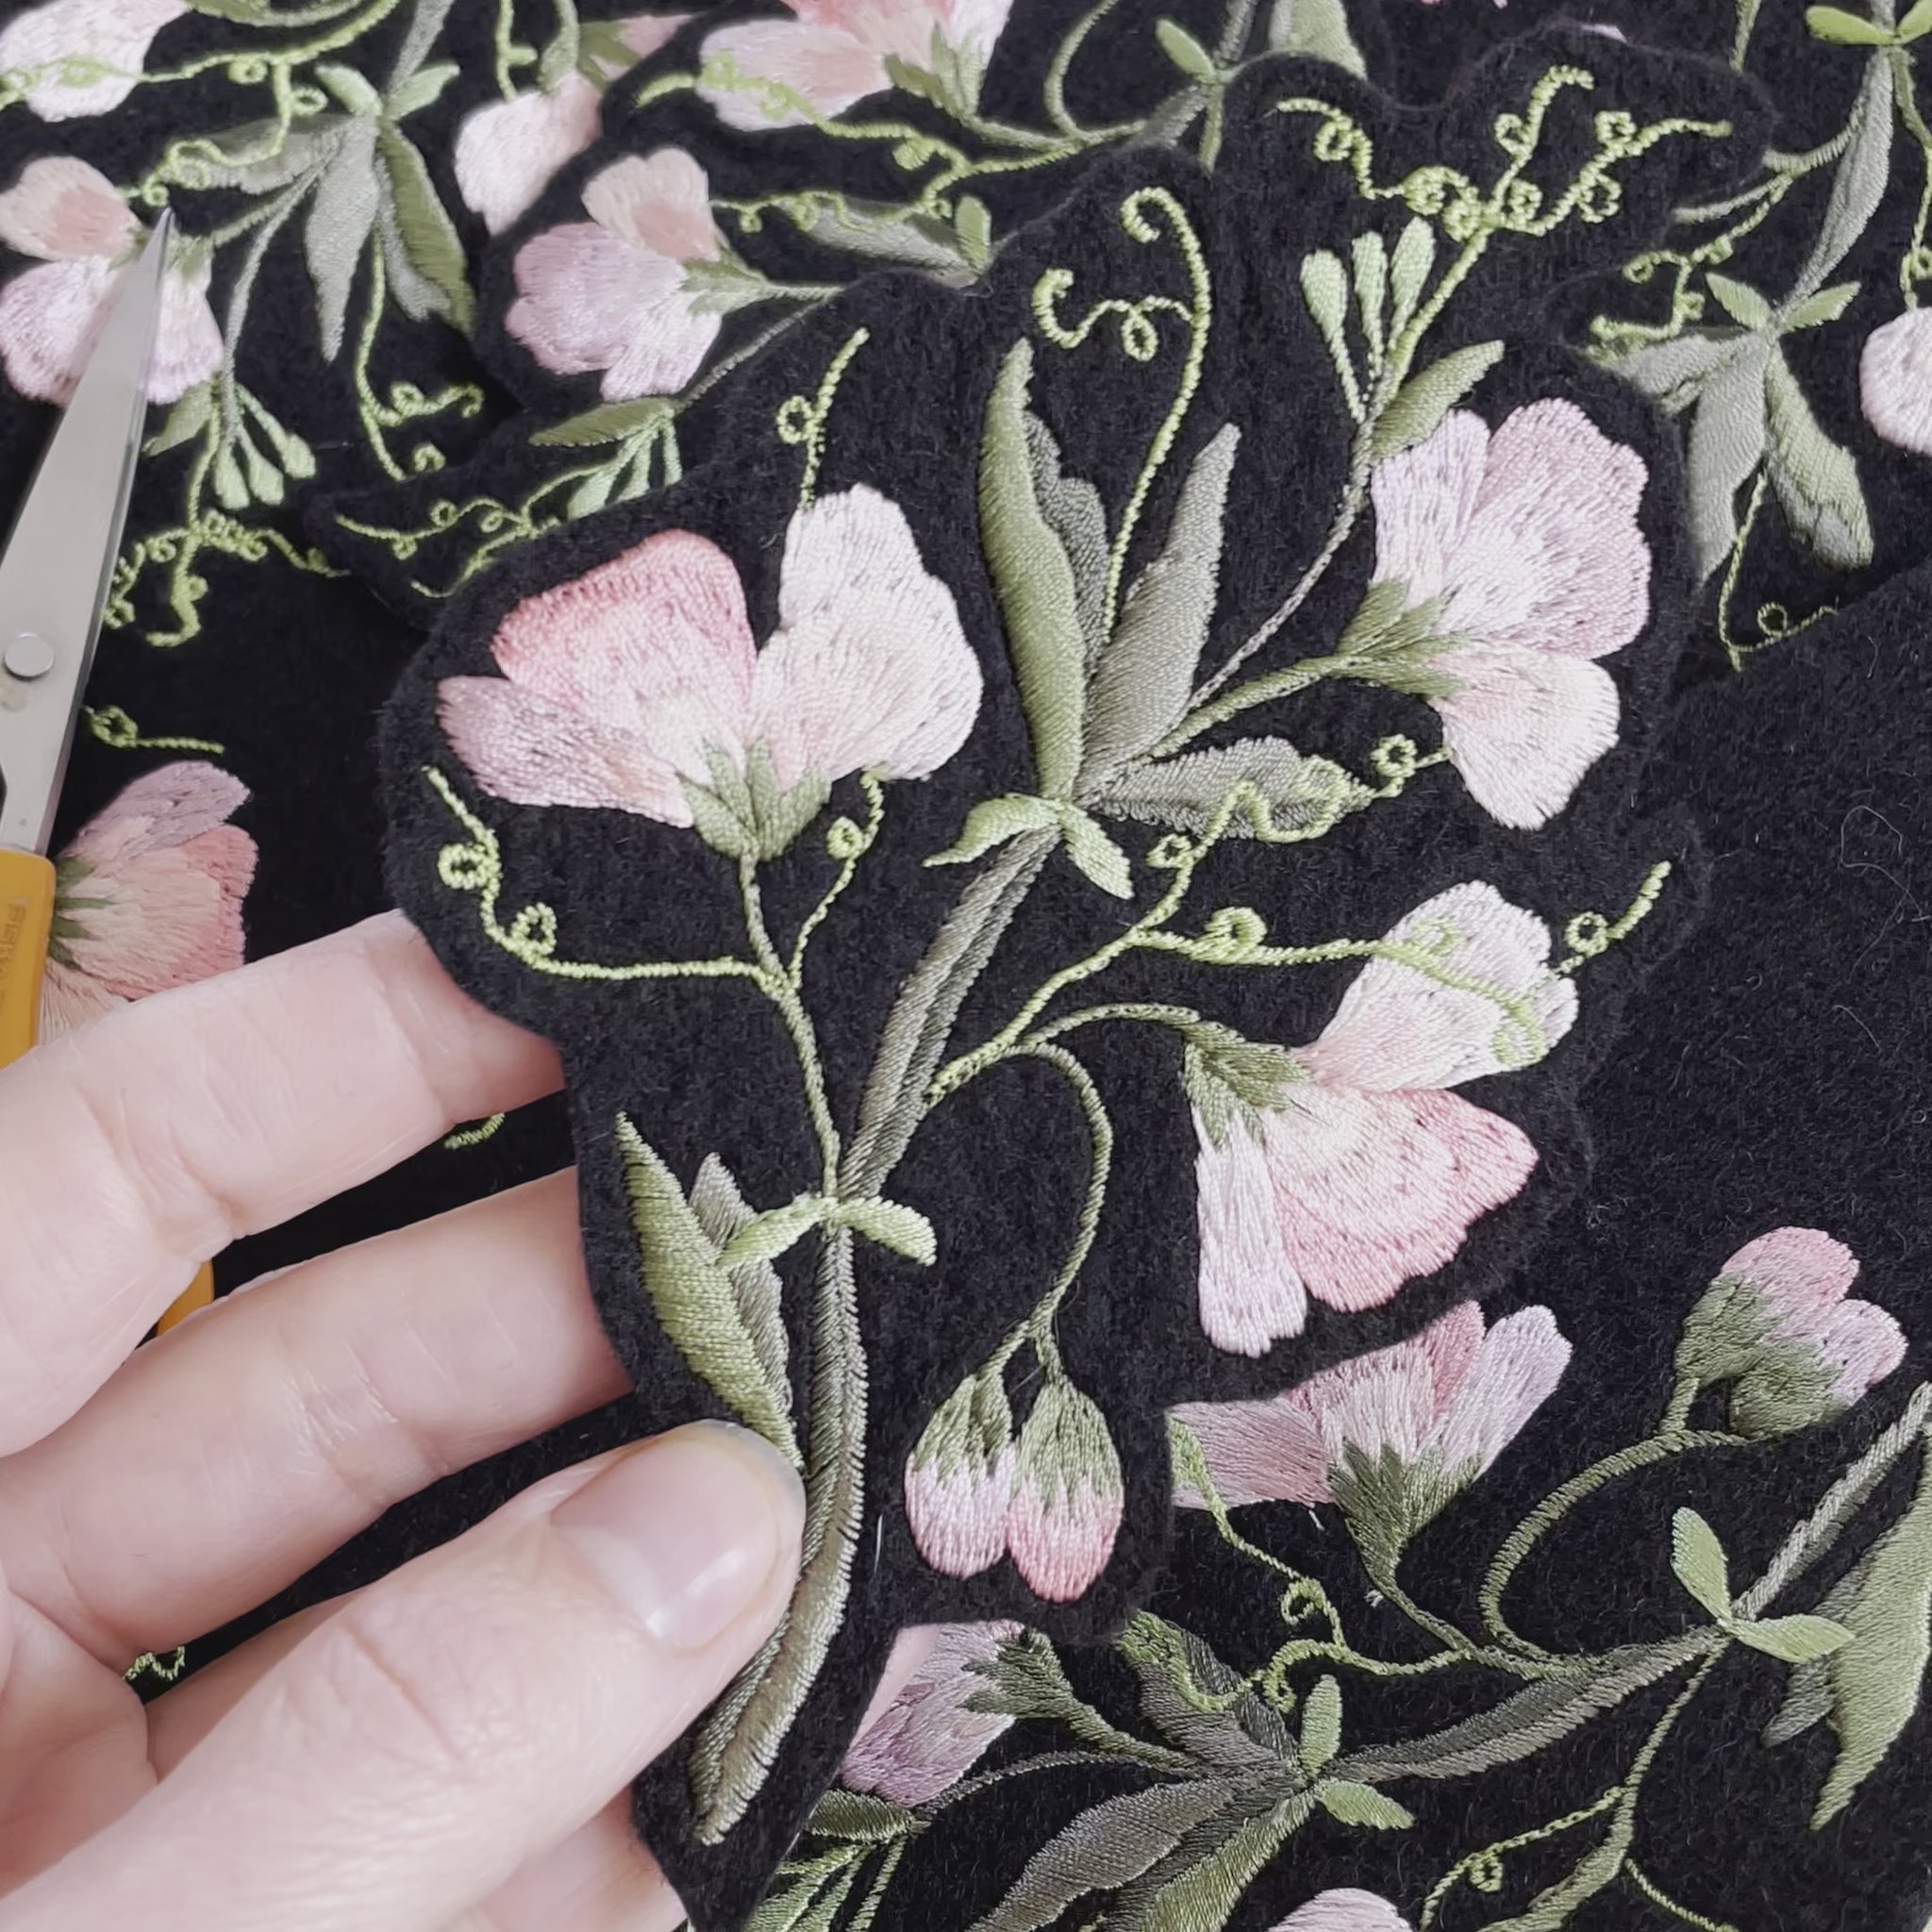 Video of a hand holding a sweet pea embroidrered patch and tilting it from side to side to show the embroidery. More sweet pea patches can be seen in the background